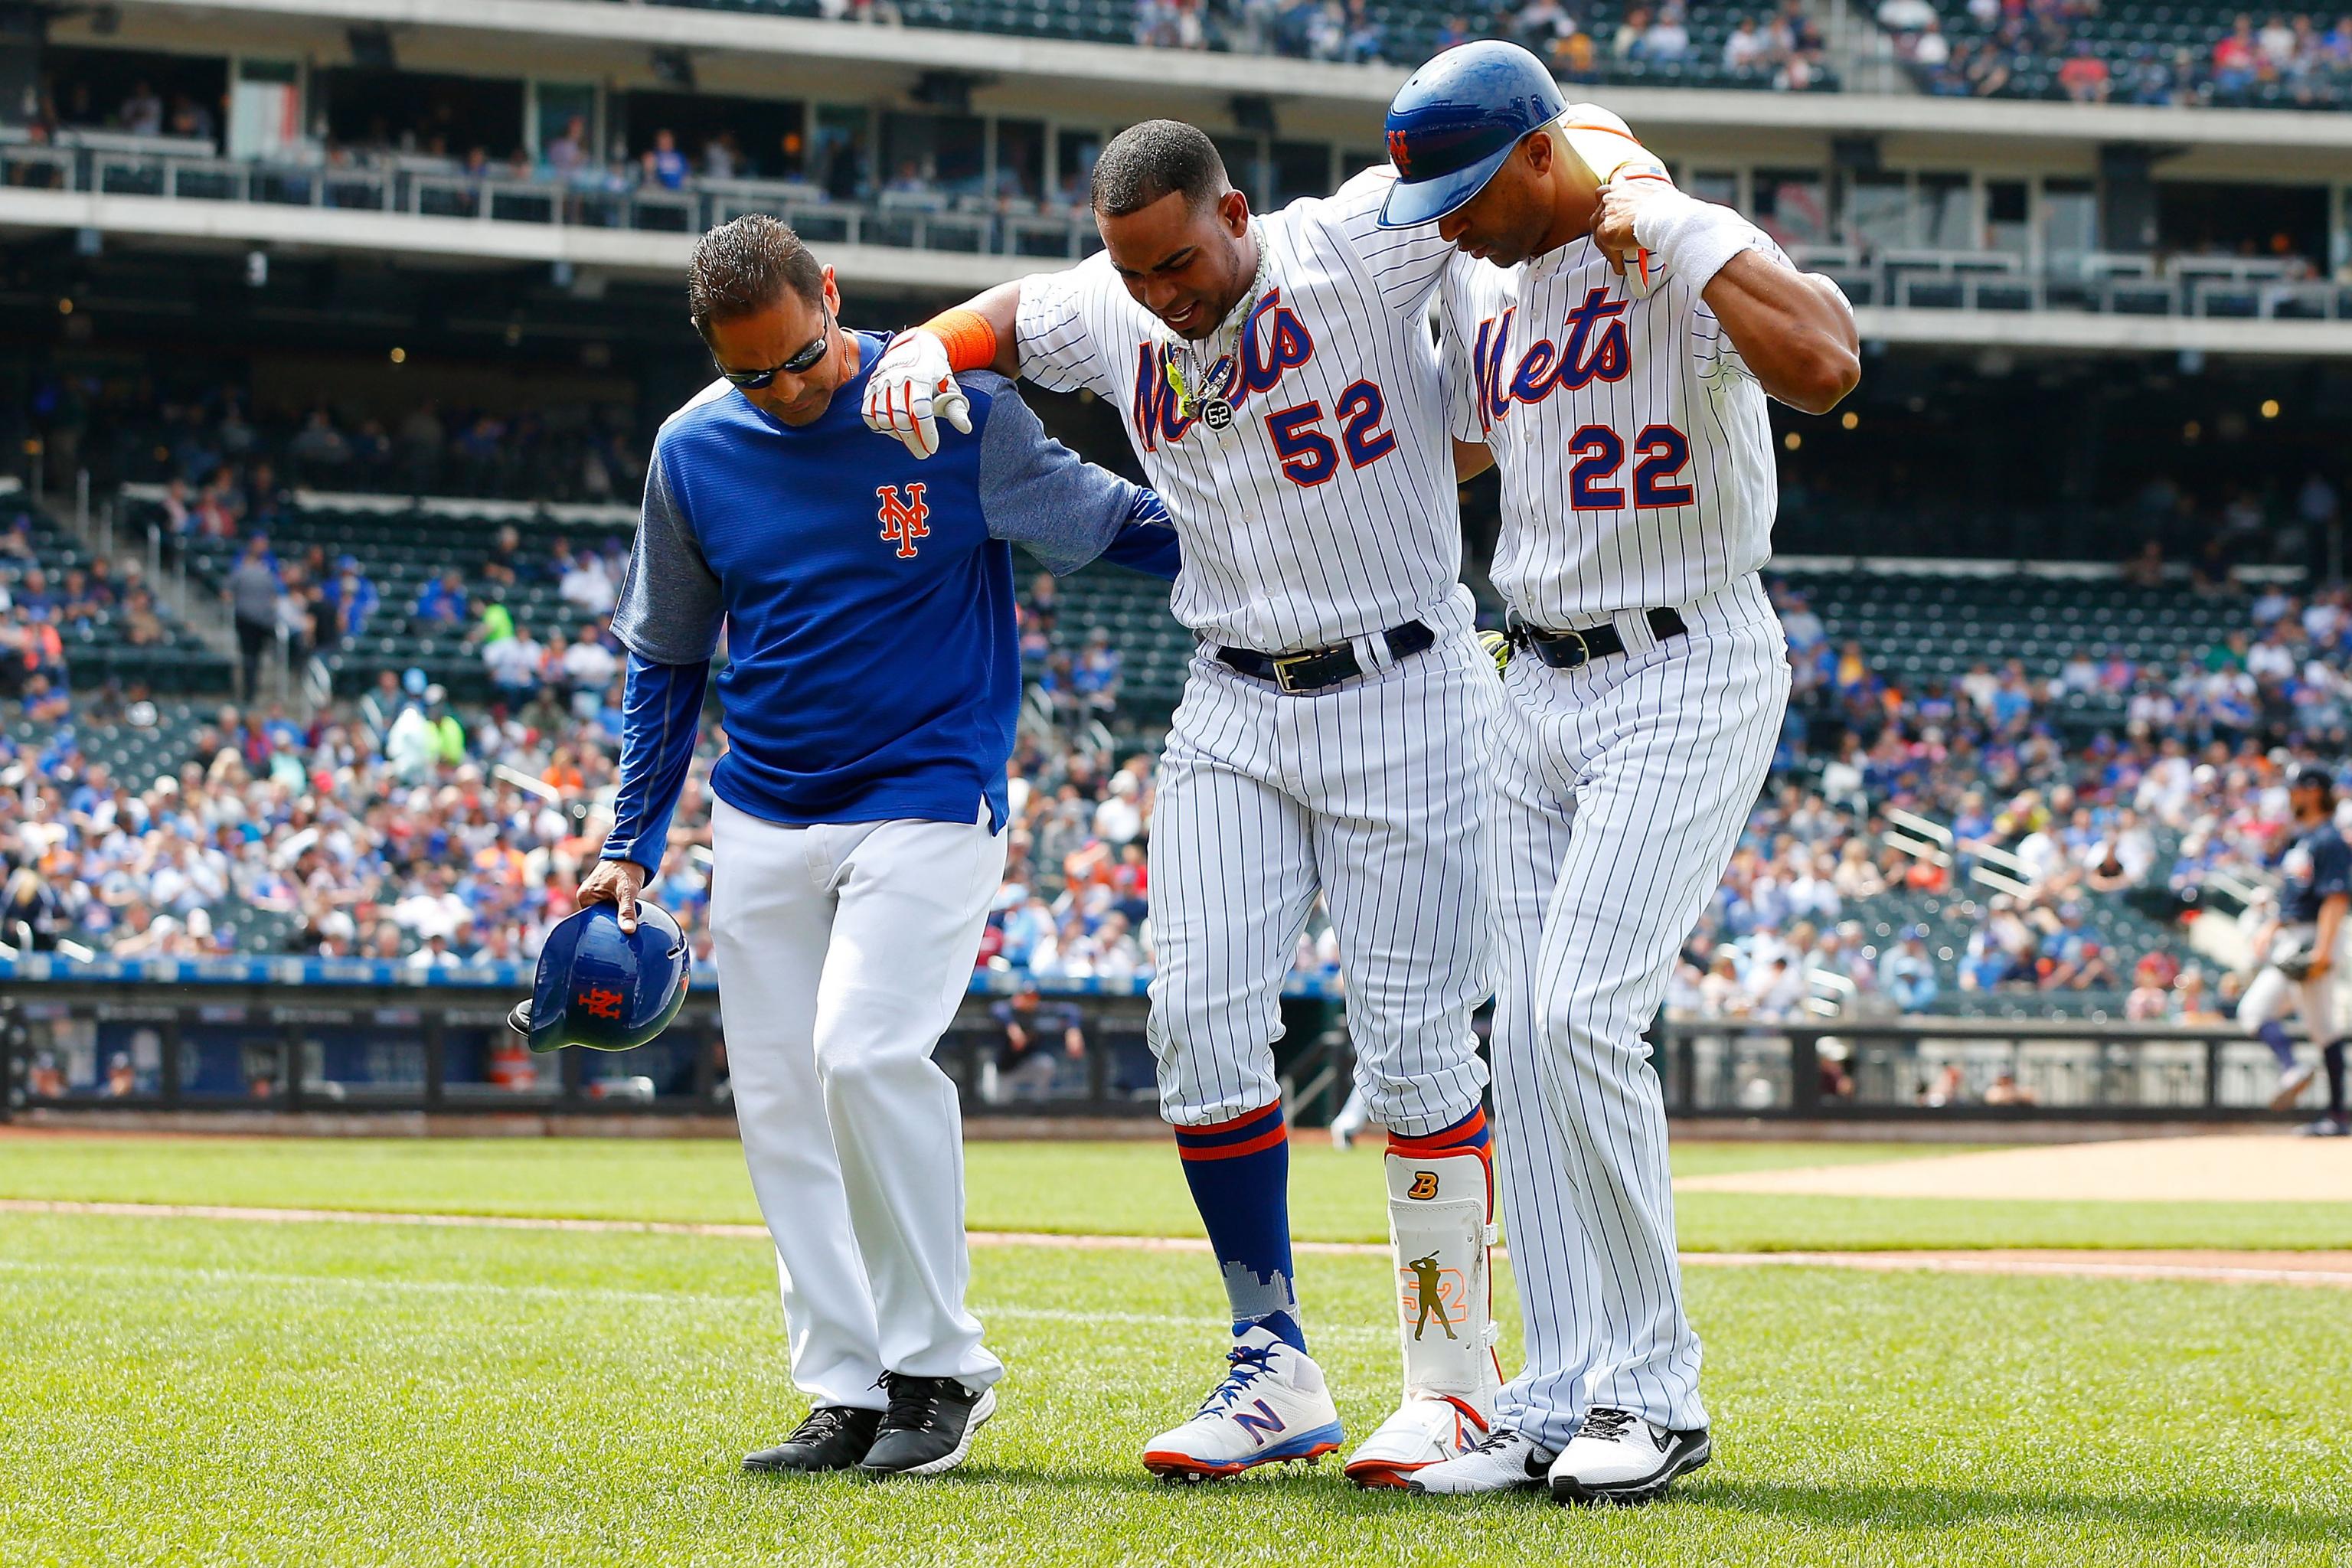 Mets star Yoenis Céspedes to opt out of 2020 season after going awol in  Atlanta, New York Mets